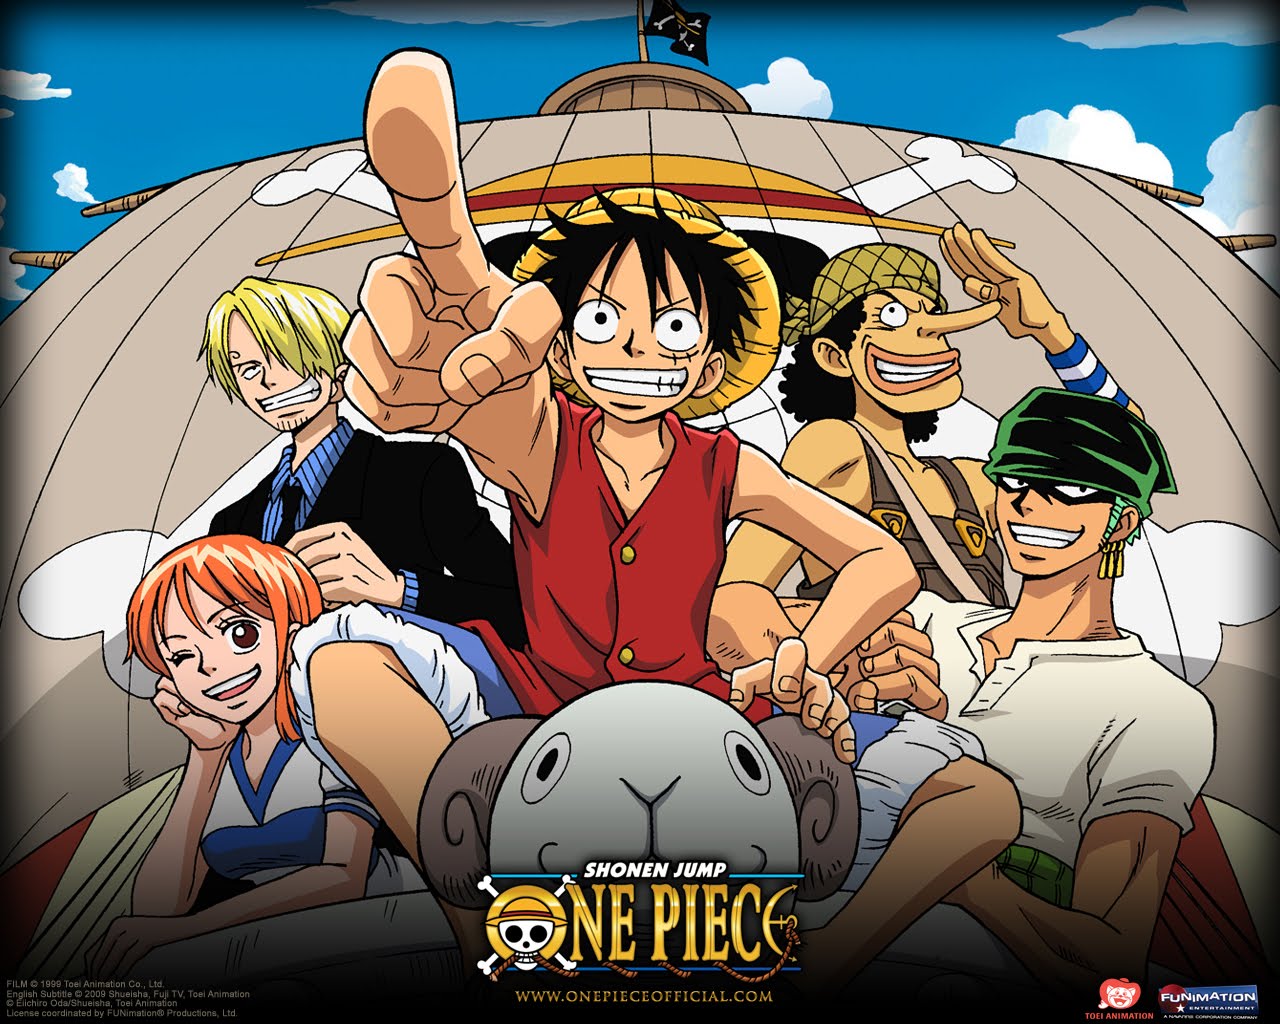 Download this One Piece Dublado Epis Dios picture